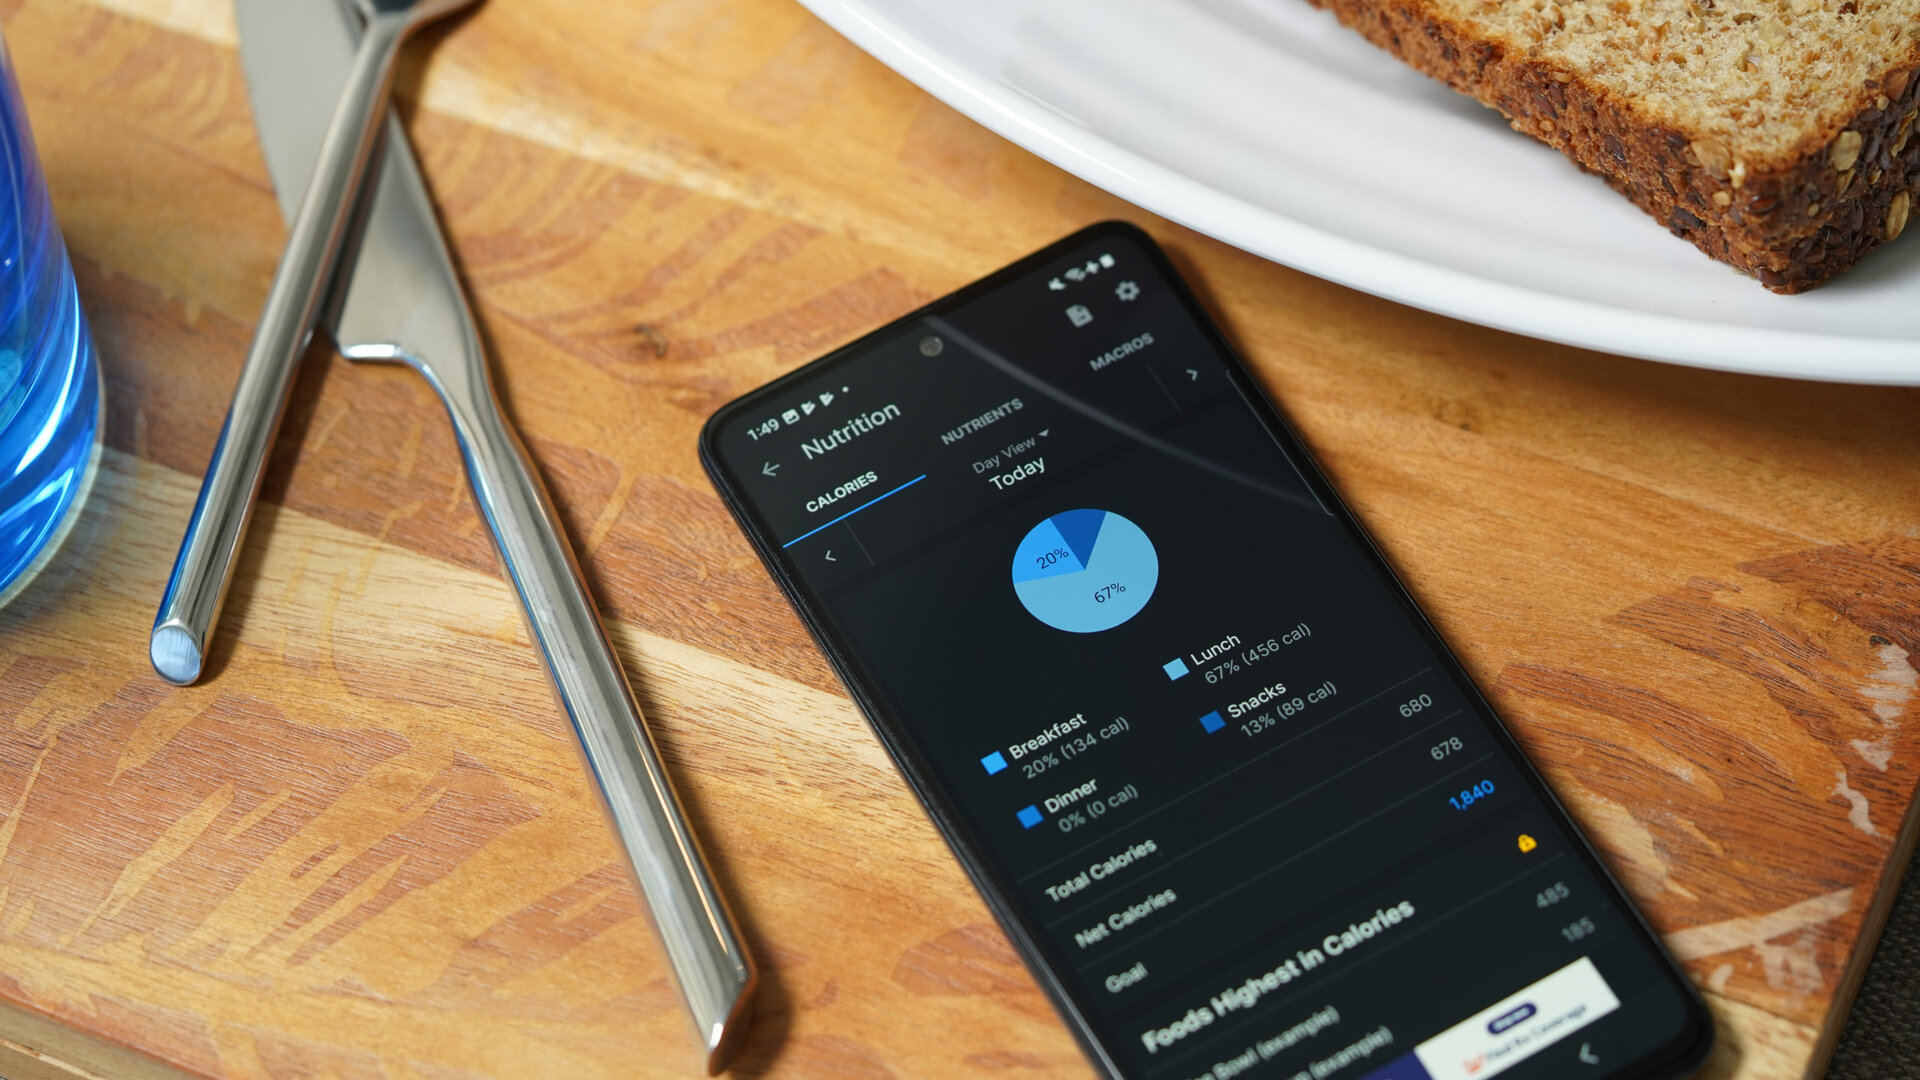 A Galaxy A51 displays a user's nutritional intake in the MyFitnessPal app.